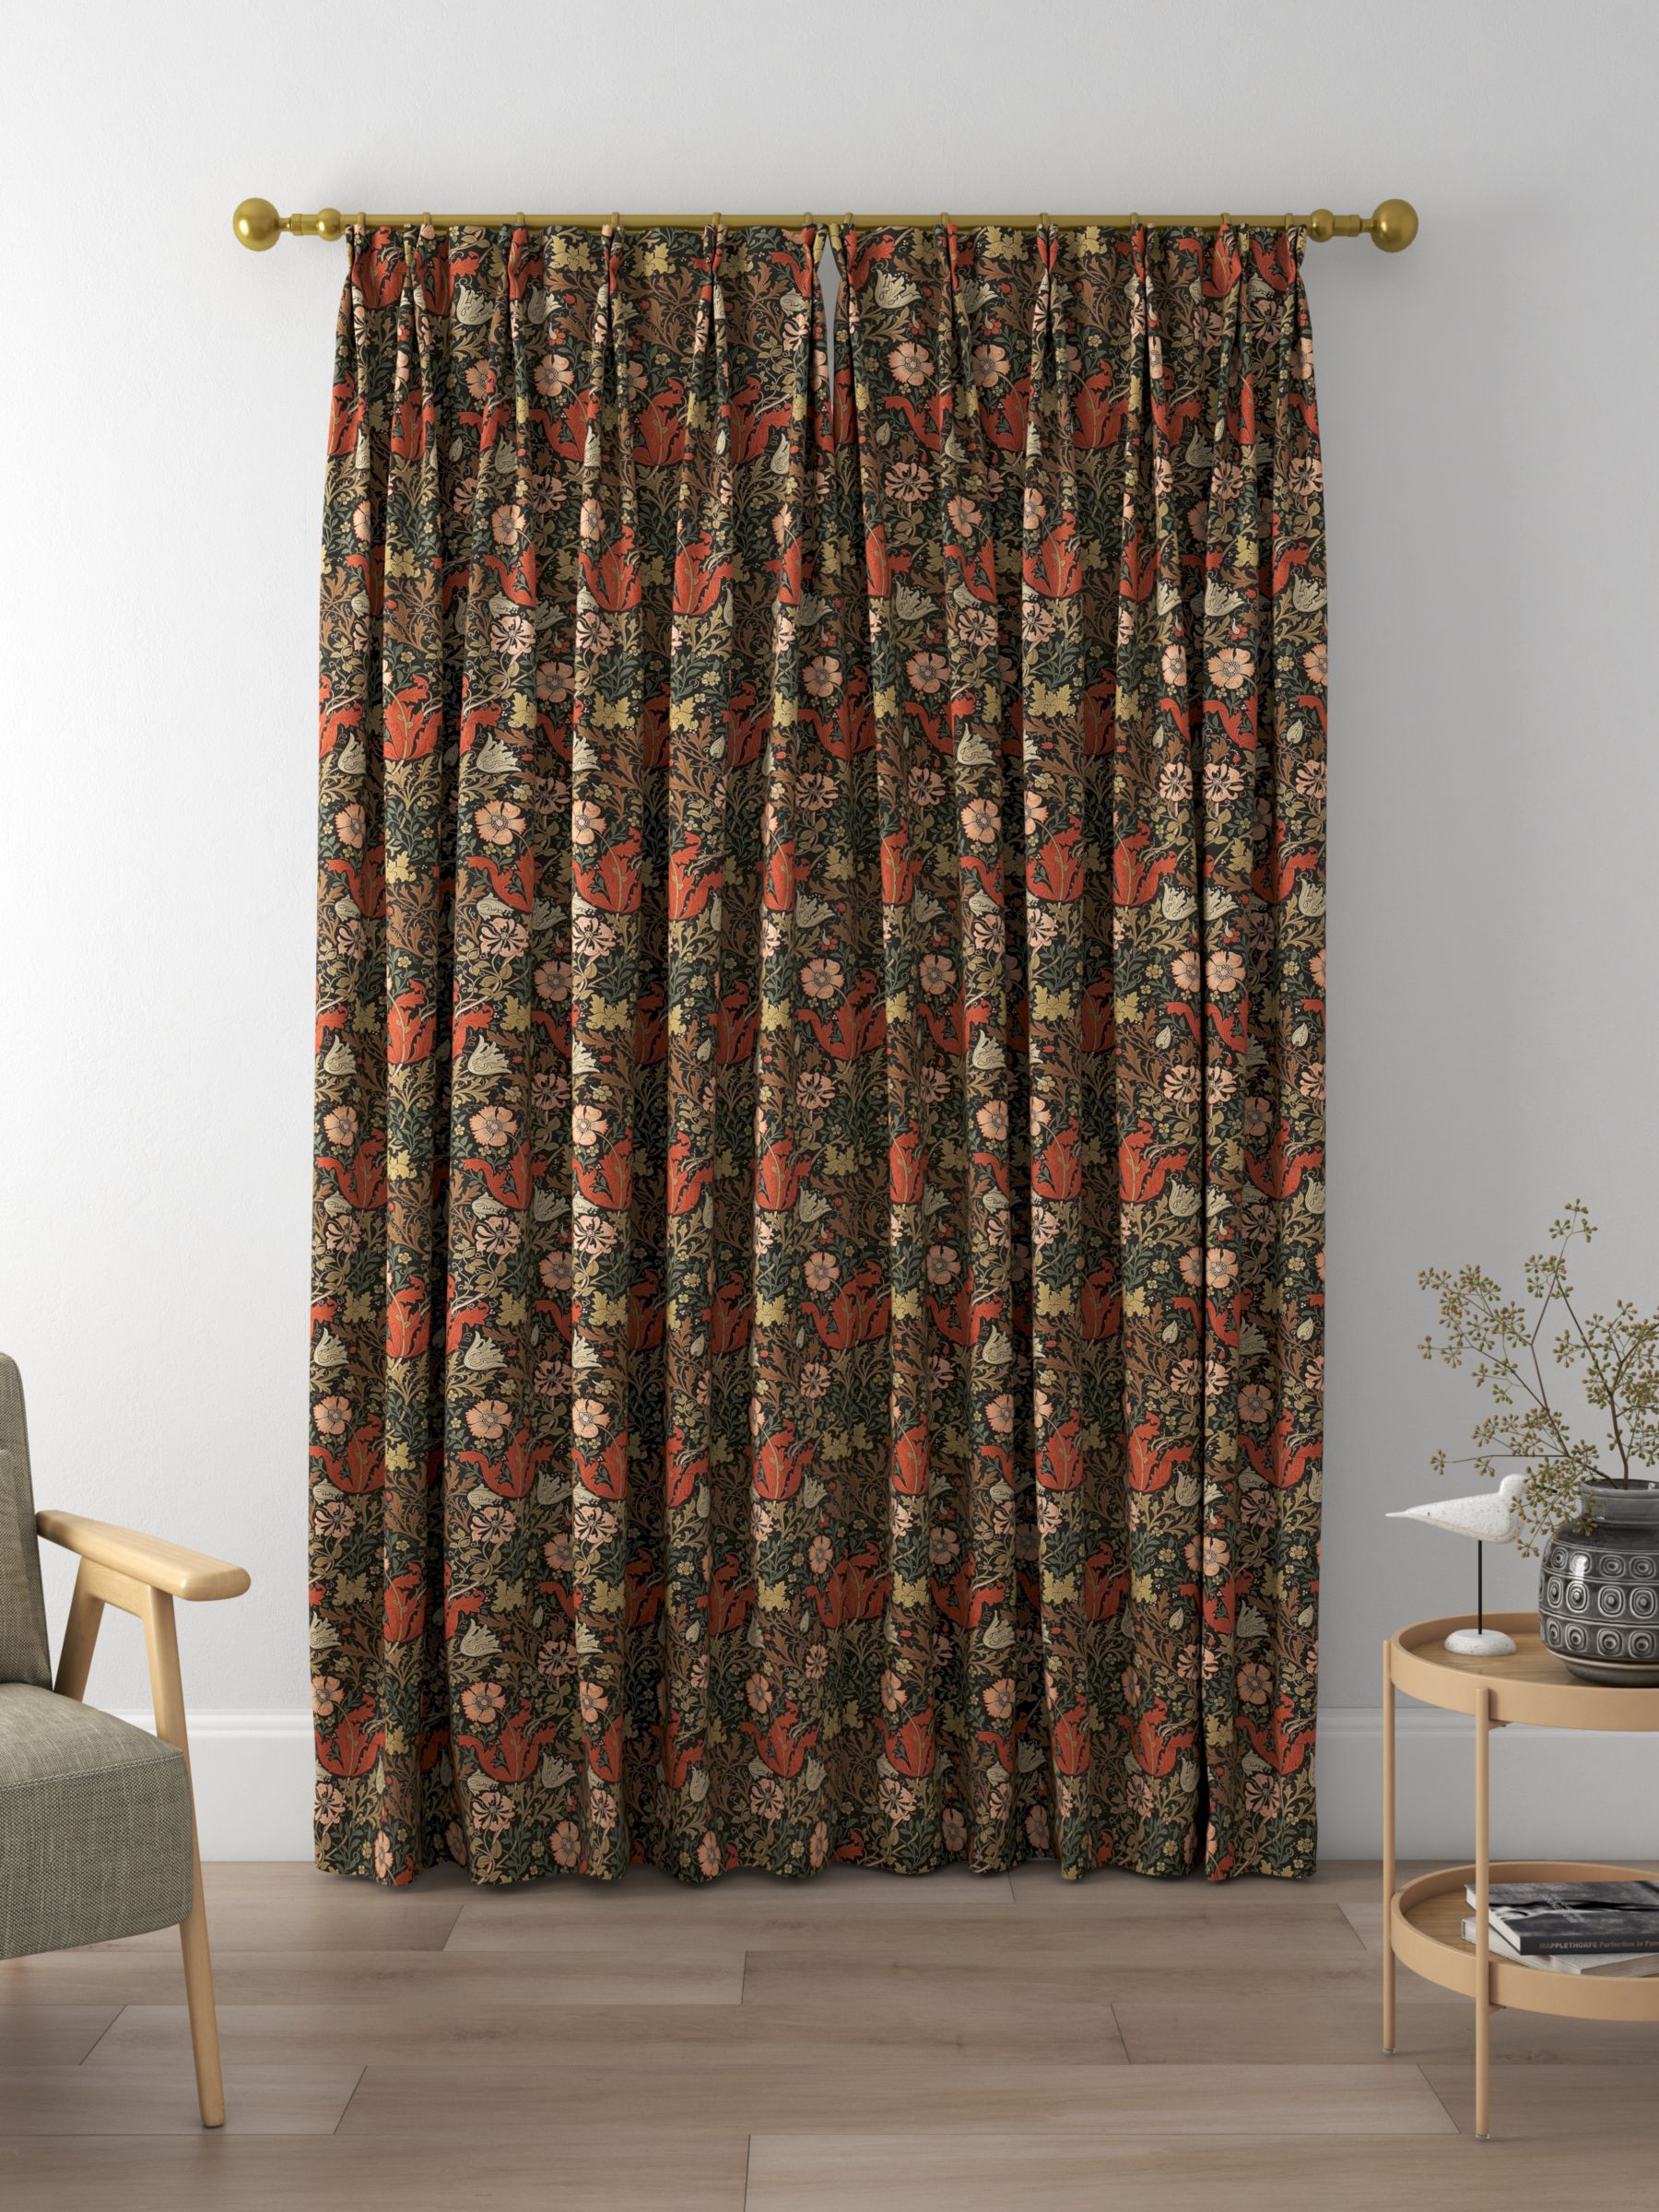 Morris & Co. Compton Made to Measure Curtains, Faded Terracotta